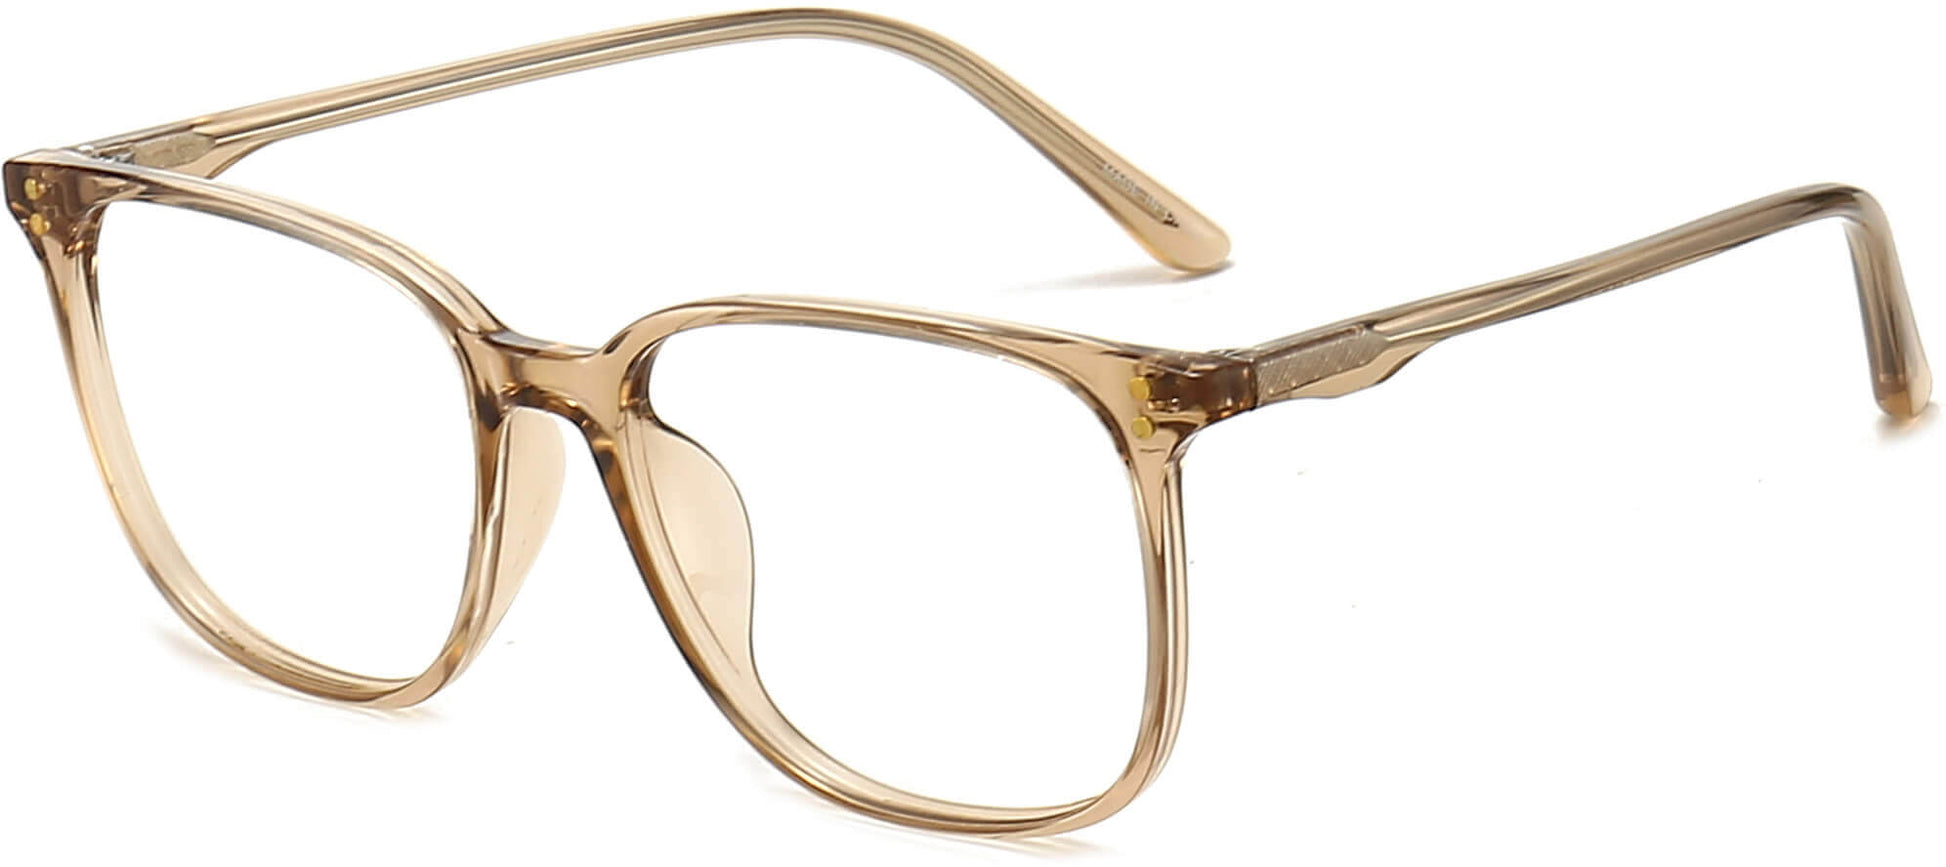 Zara Square Brown Eyeglasses from ANRRI, angle view